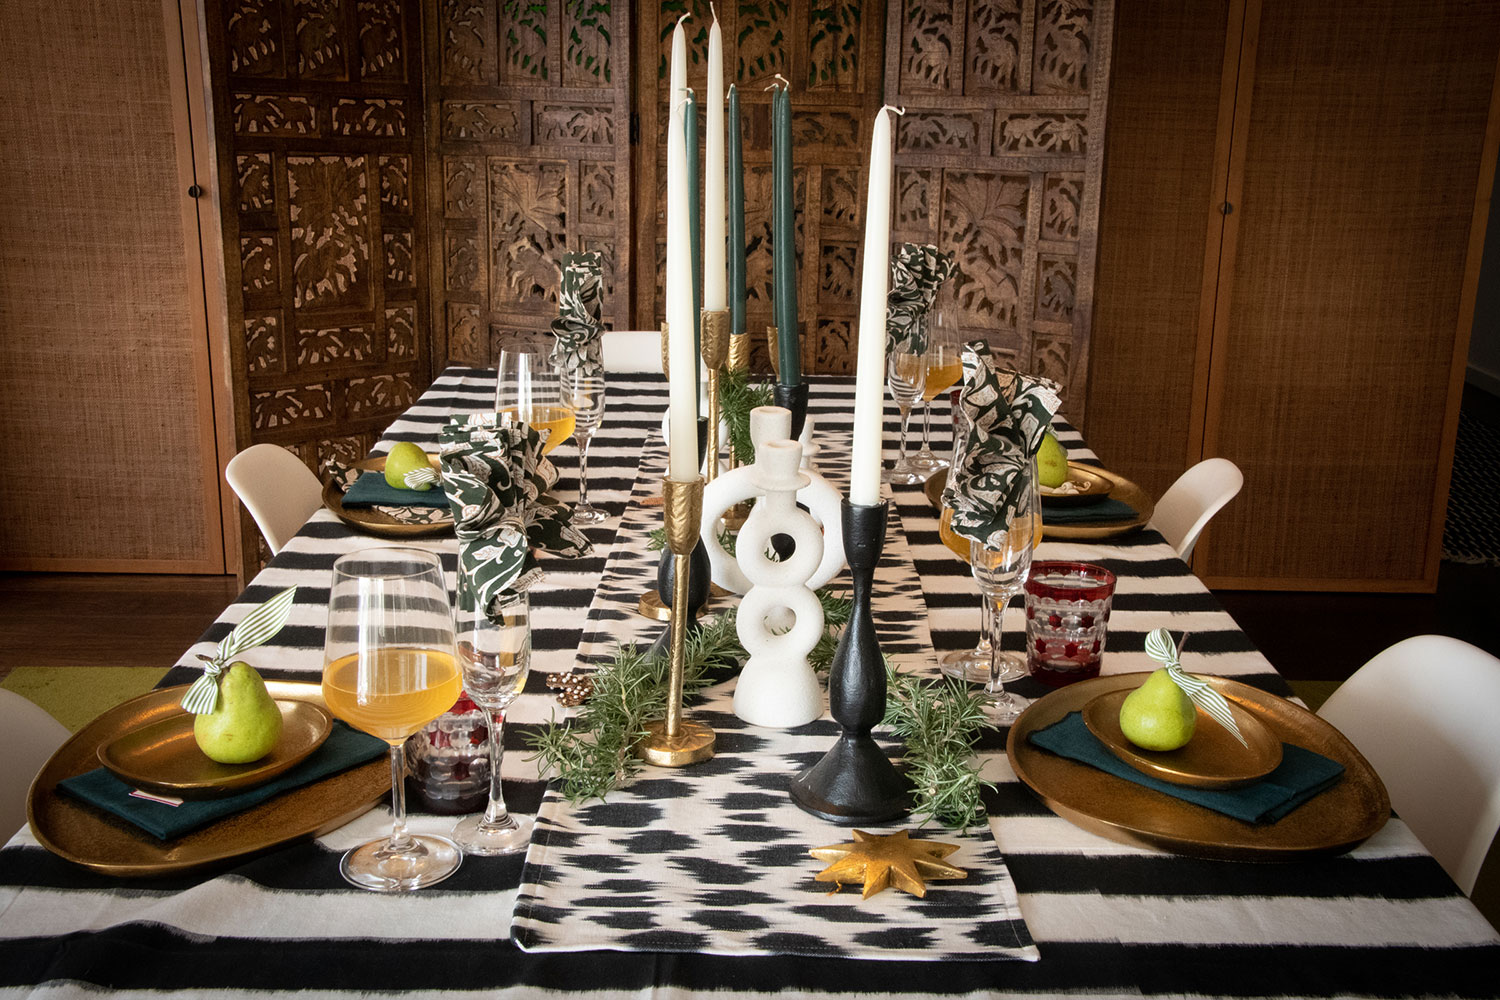 Black and White Sophisticated Festive Tablescaping Theme | No Chintz Textiles